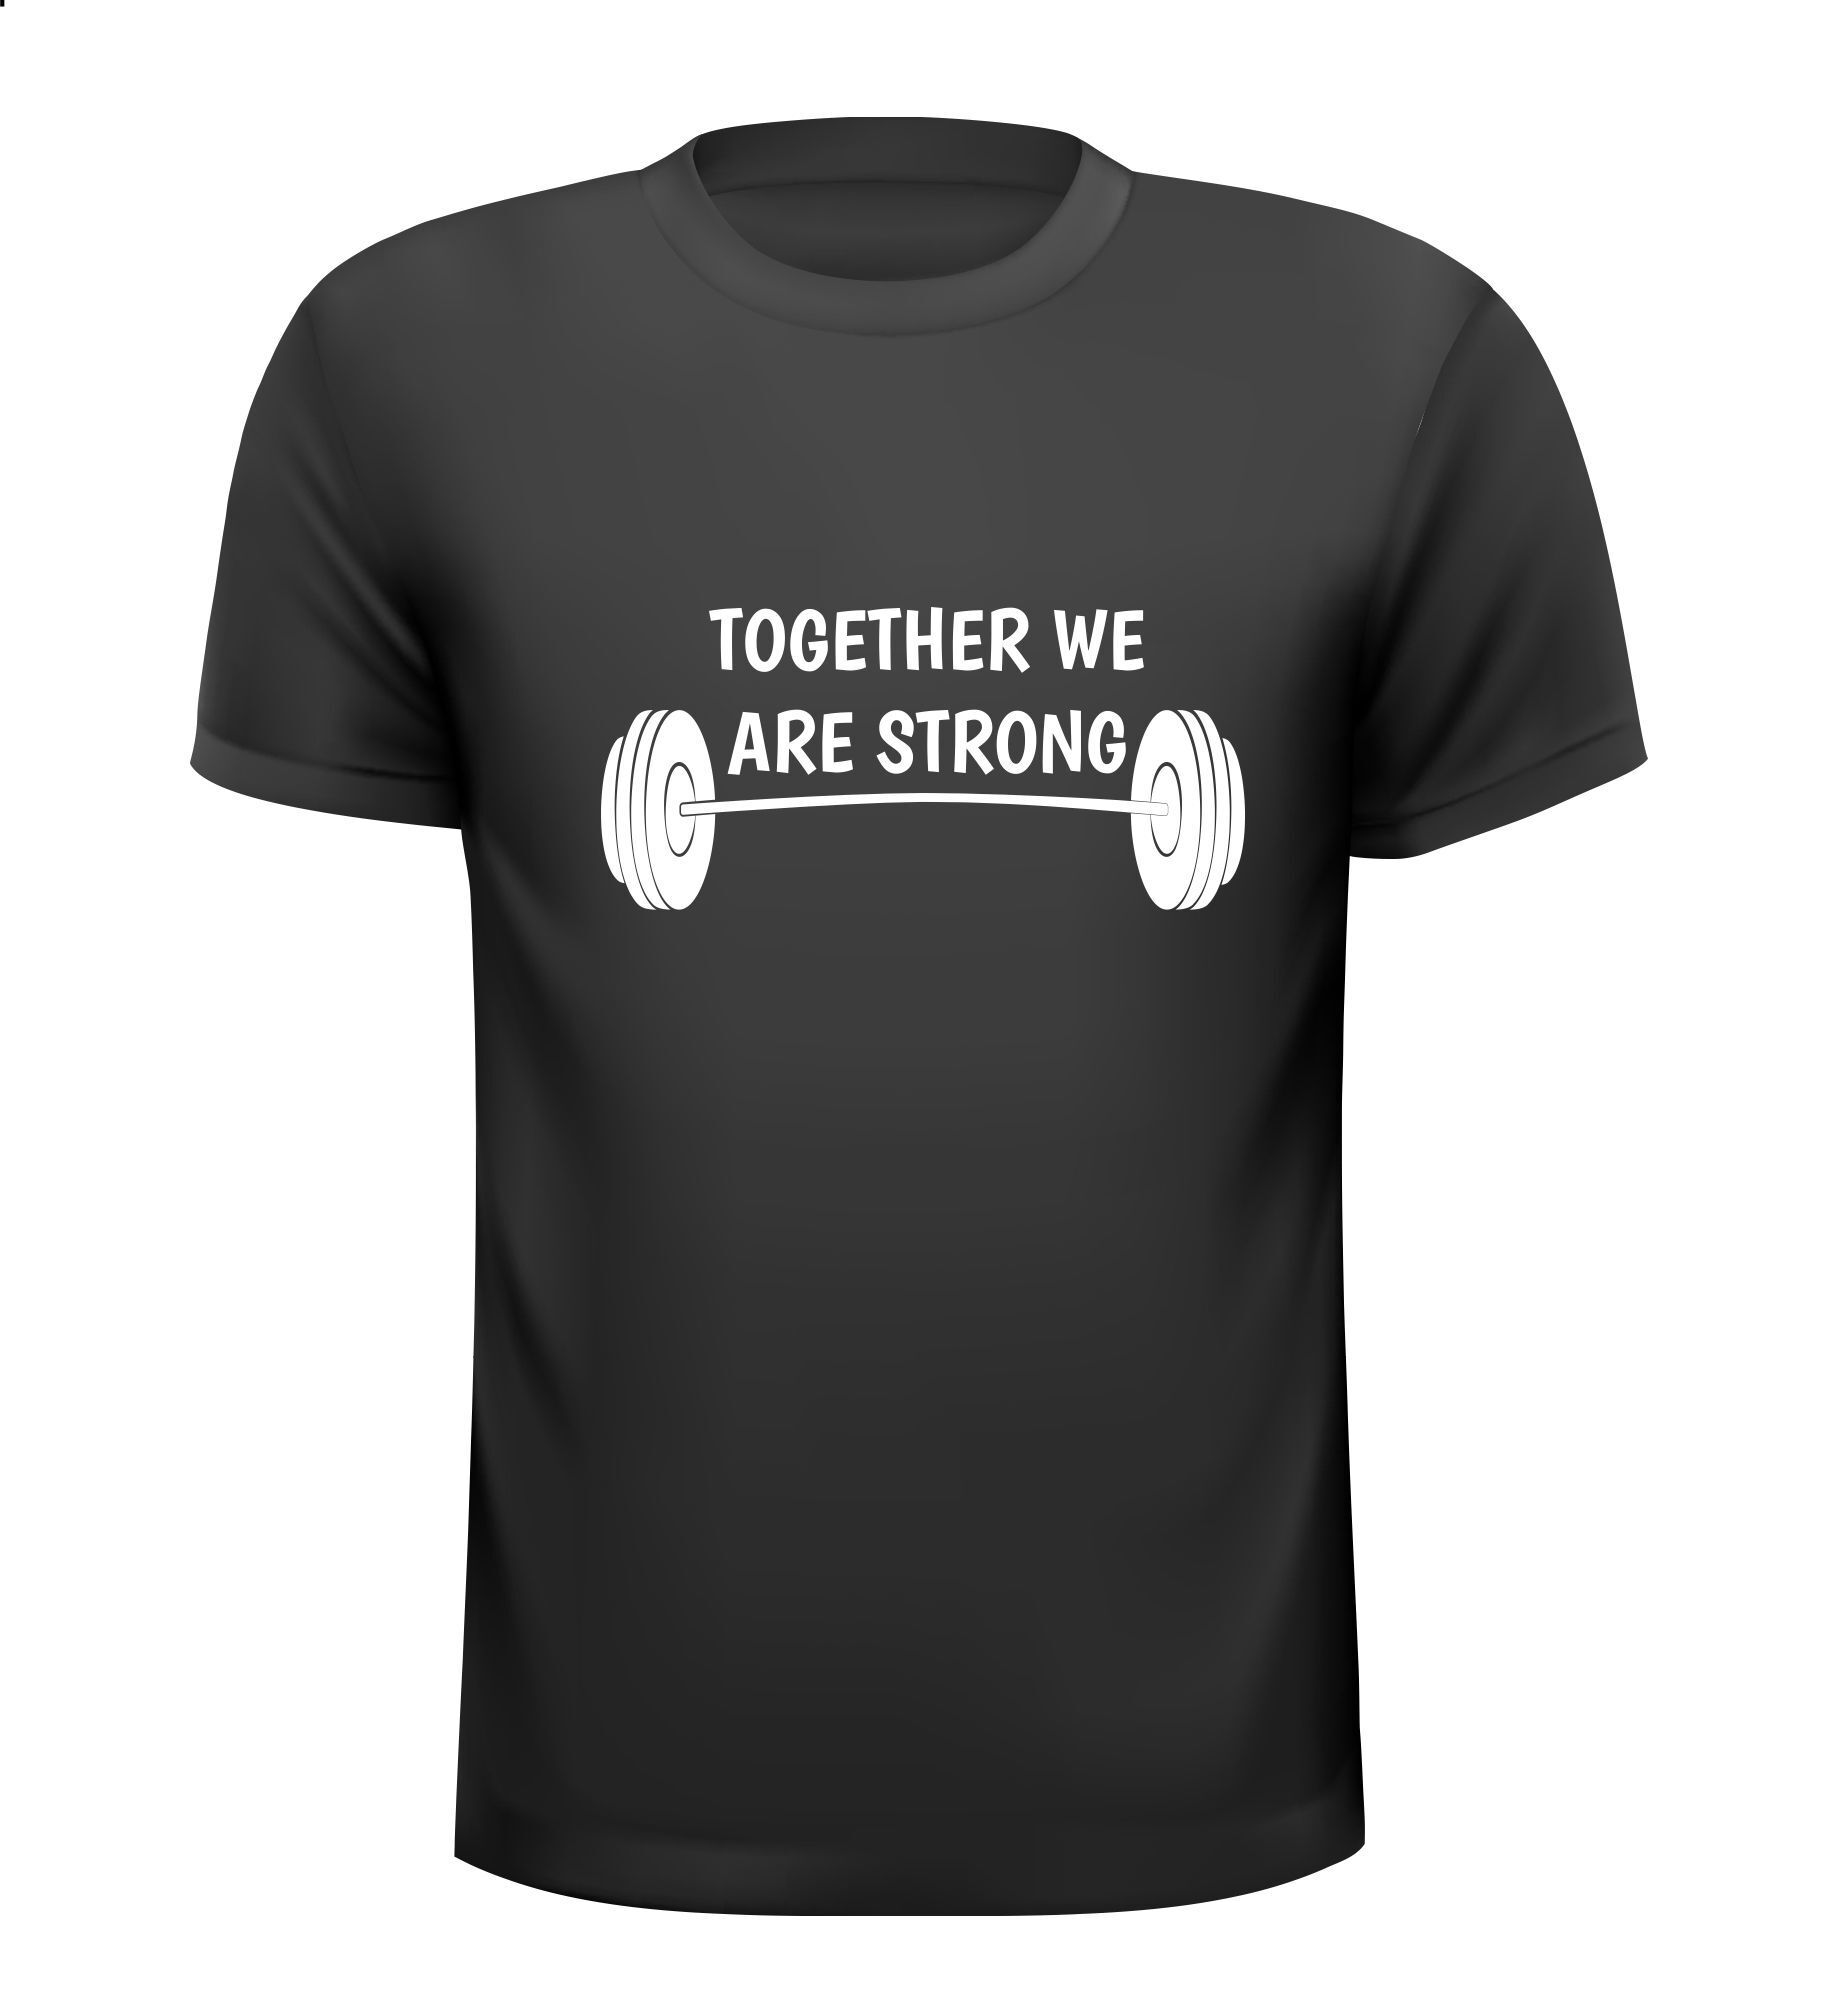 Together we are strong T-shirt